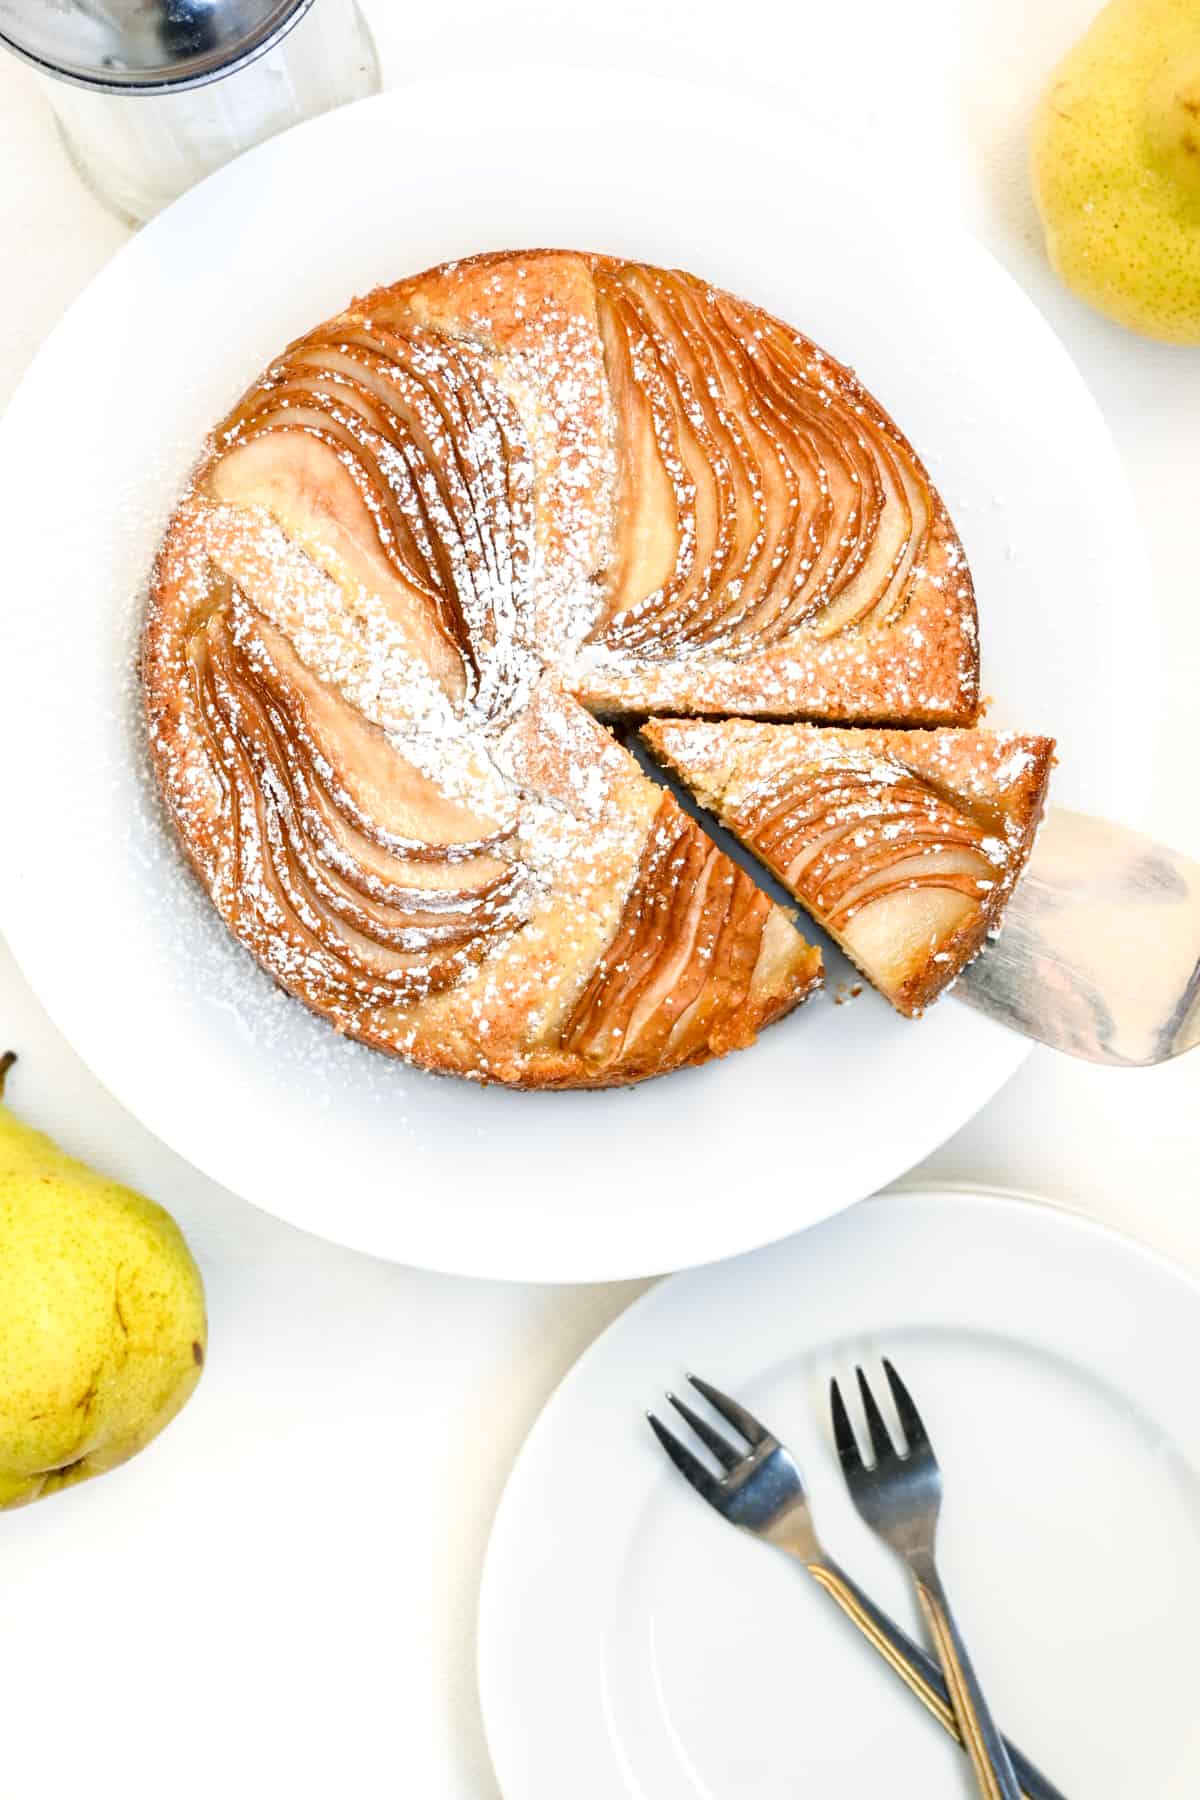 A slice of cake topped with pears and dusted with icing sugar is lifted and transferred onto a plate.